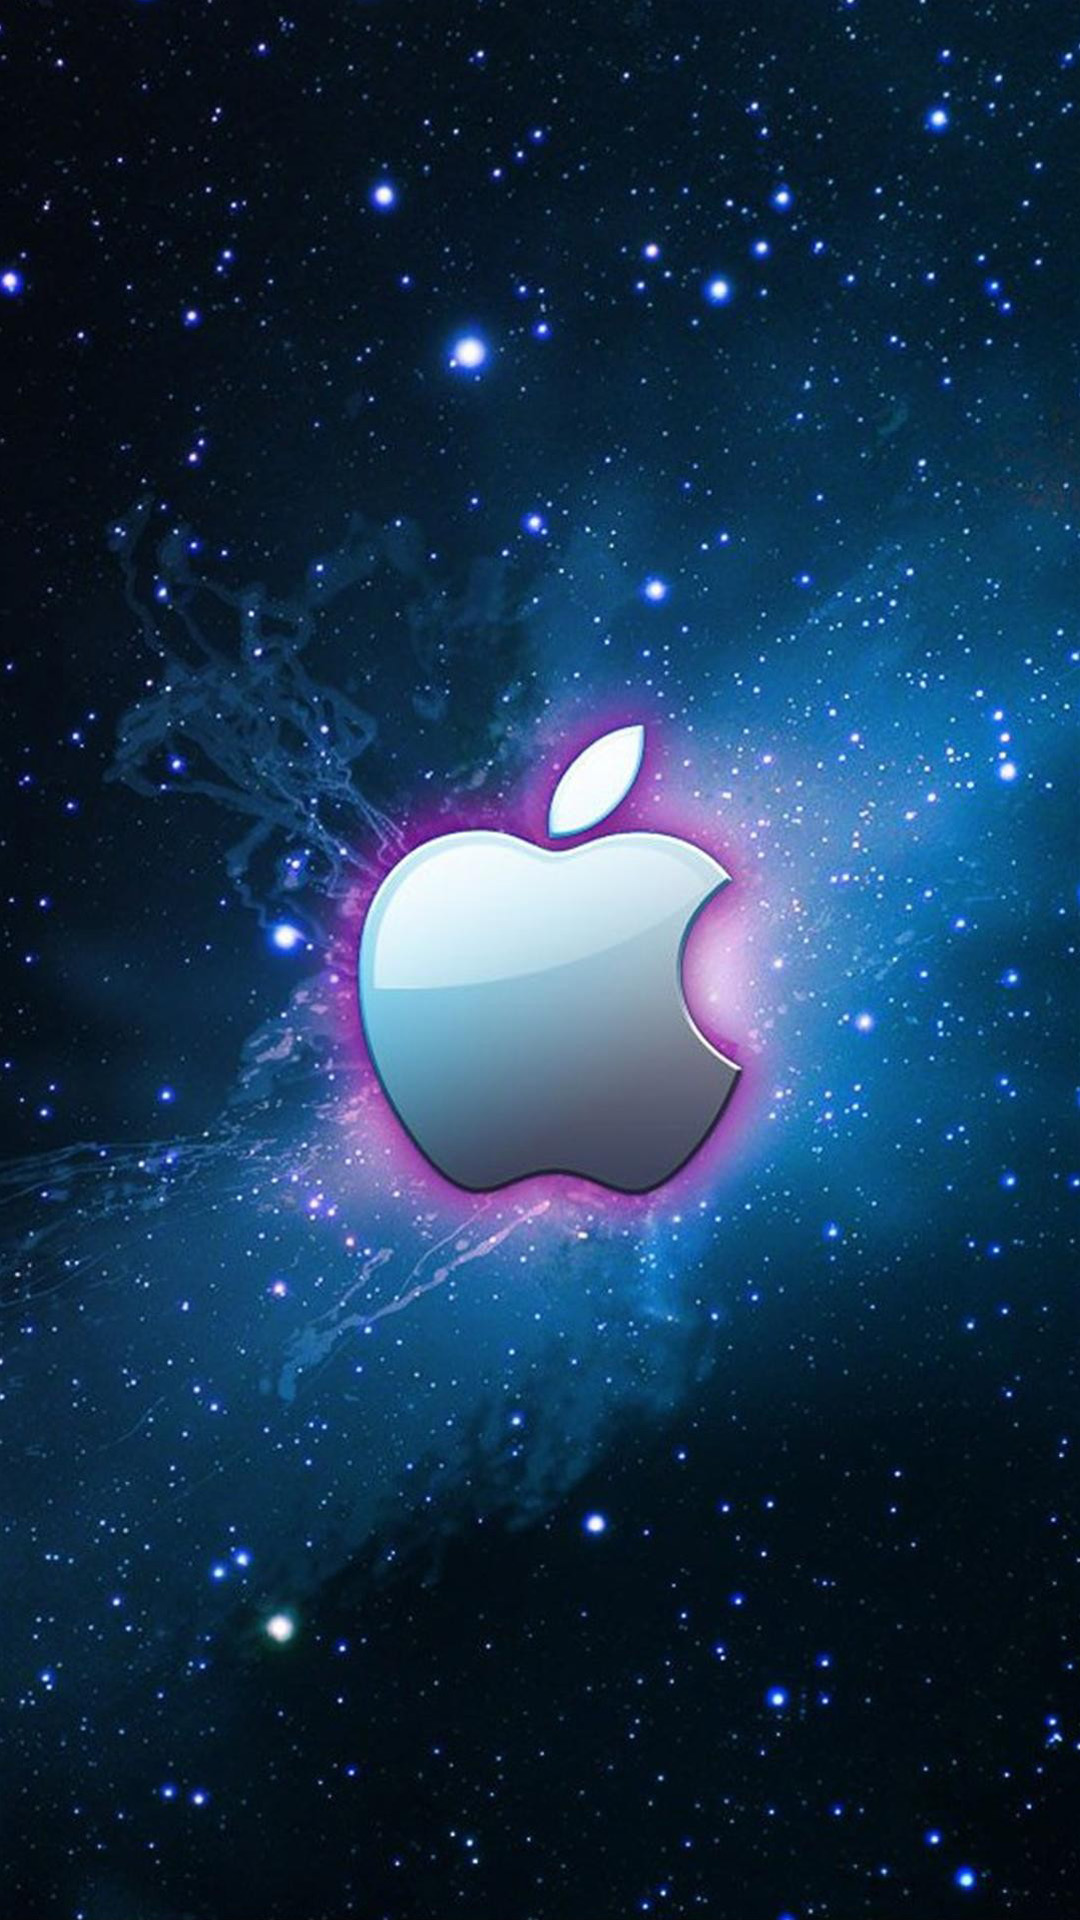 Wallpaper Apple Galaxy Picture Alhomat Magz